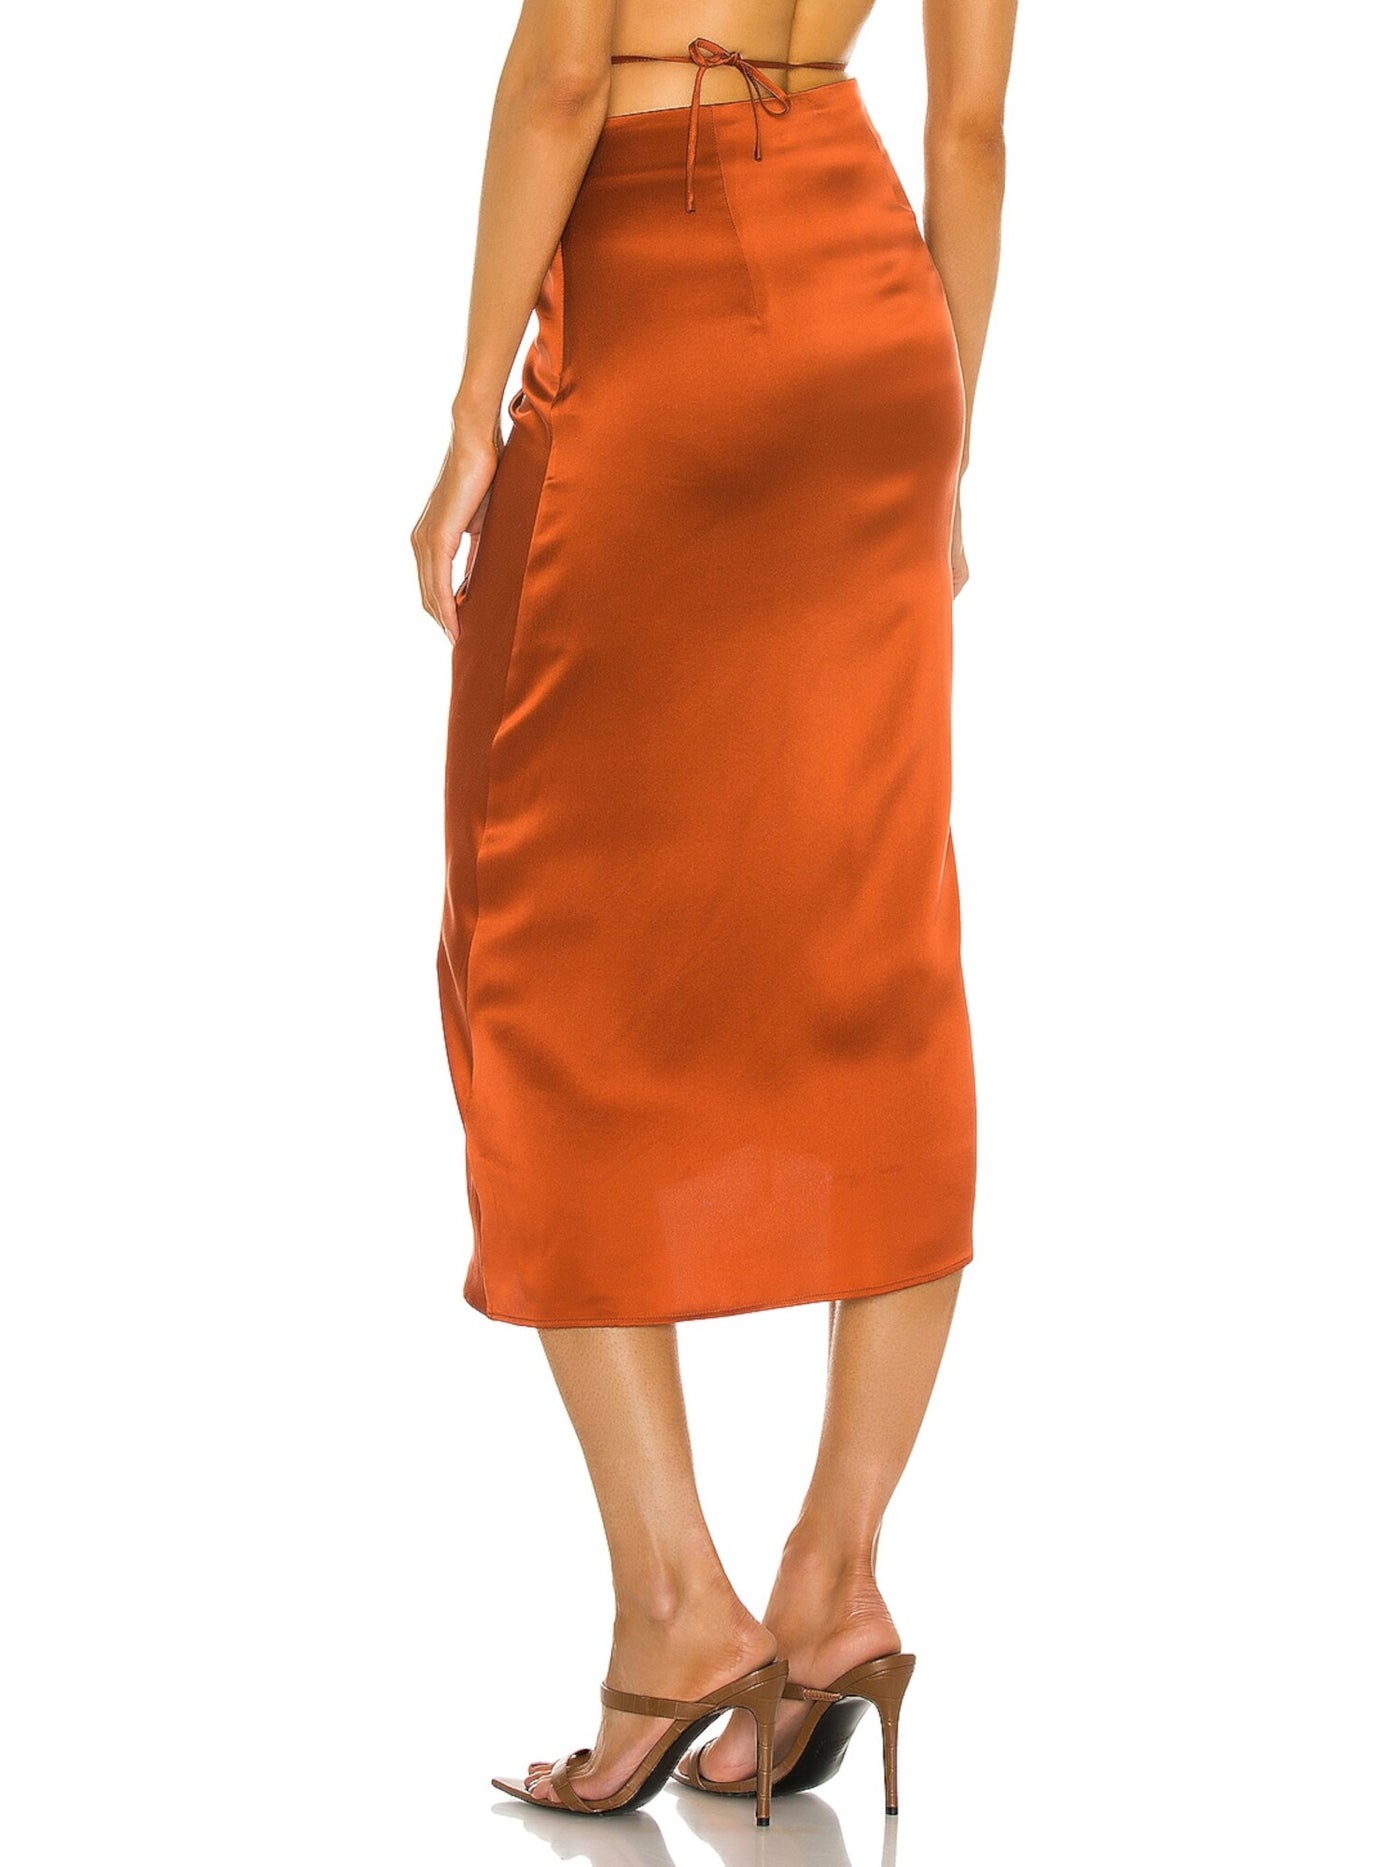 NICHOLAS Womens Orange Zippered Tie Adjustable Ruched Front Midi Party Pencil Skirt 4